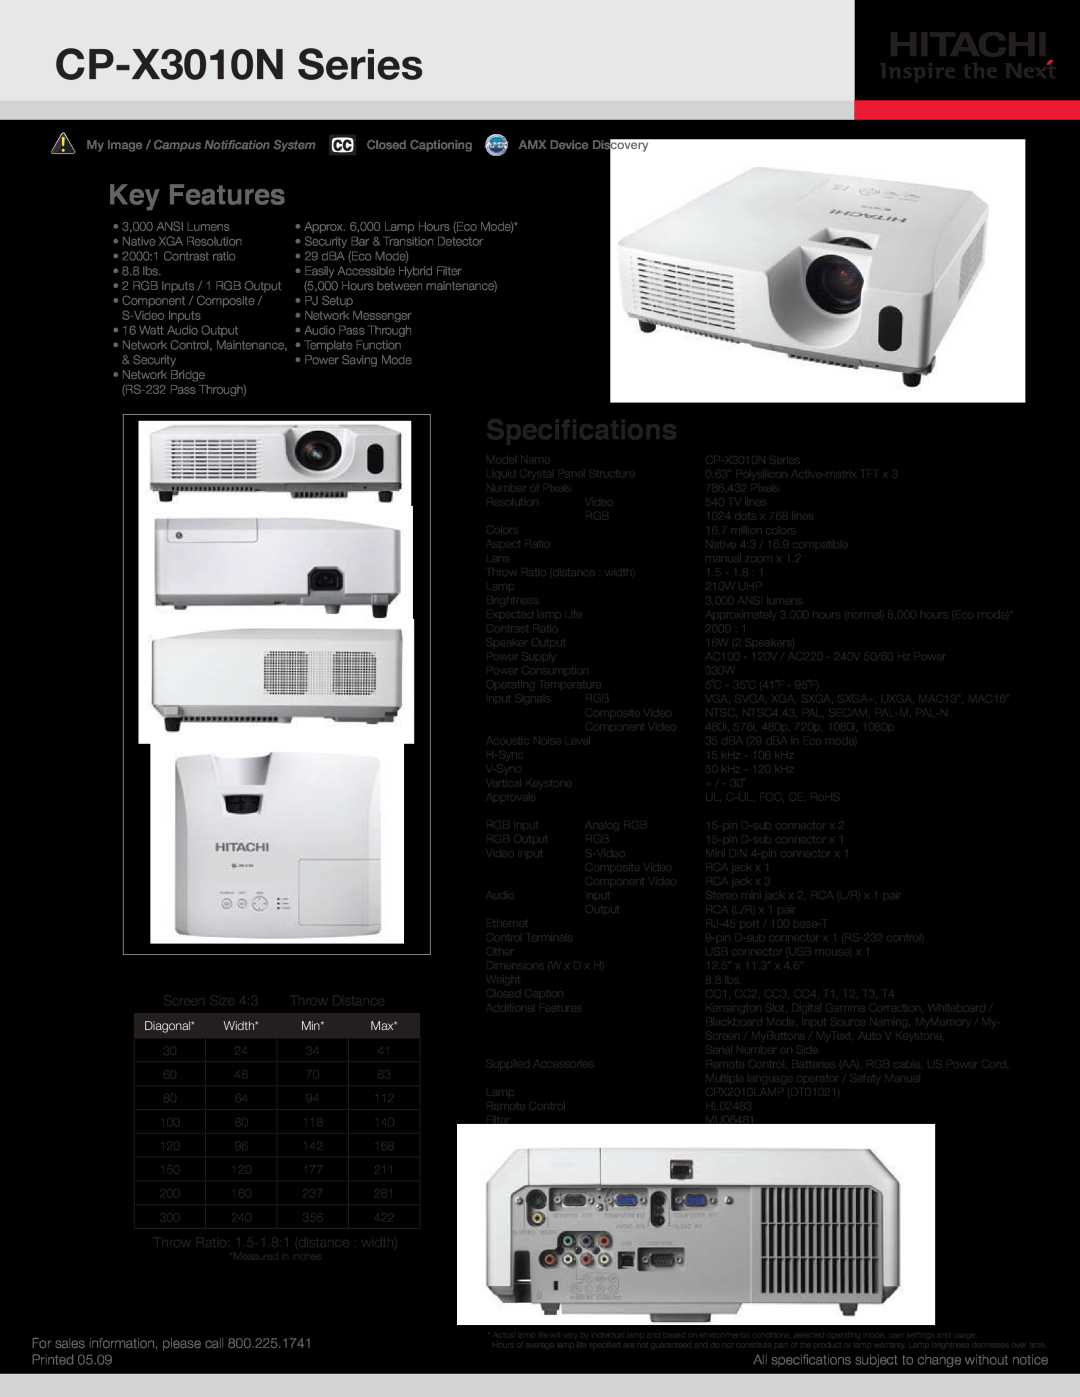 Hitachi specifications CP-X3010N Series, Key Features, Speciﬁcations, Screen Size, Throw Distance, Printed, Diagonal 